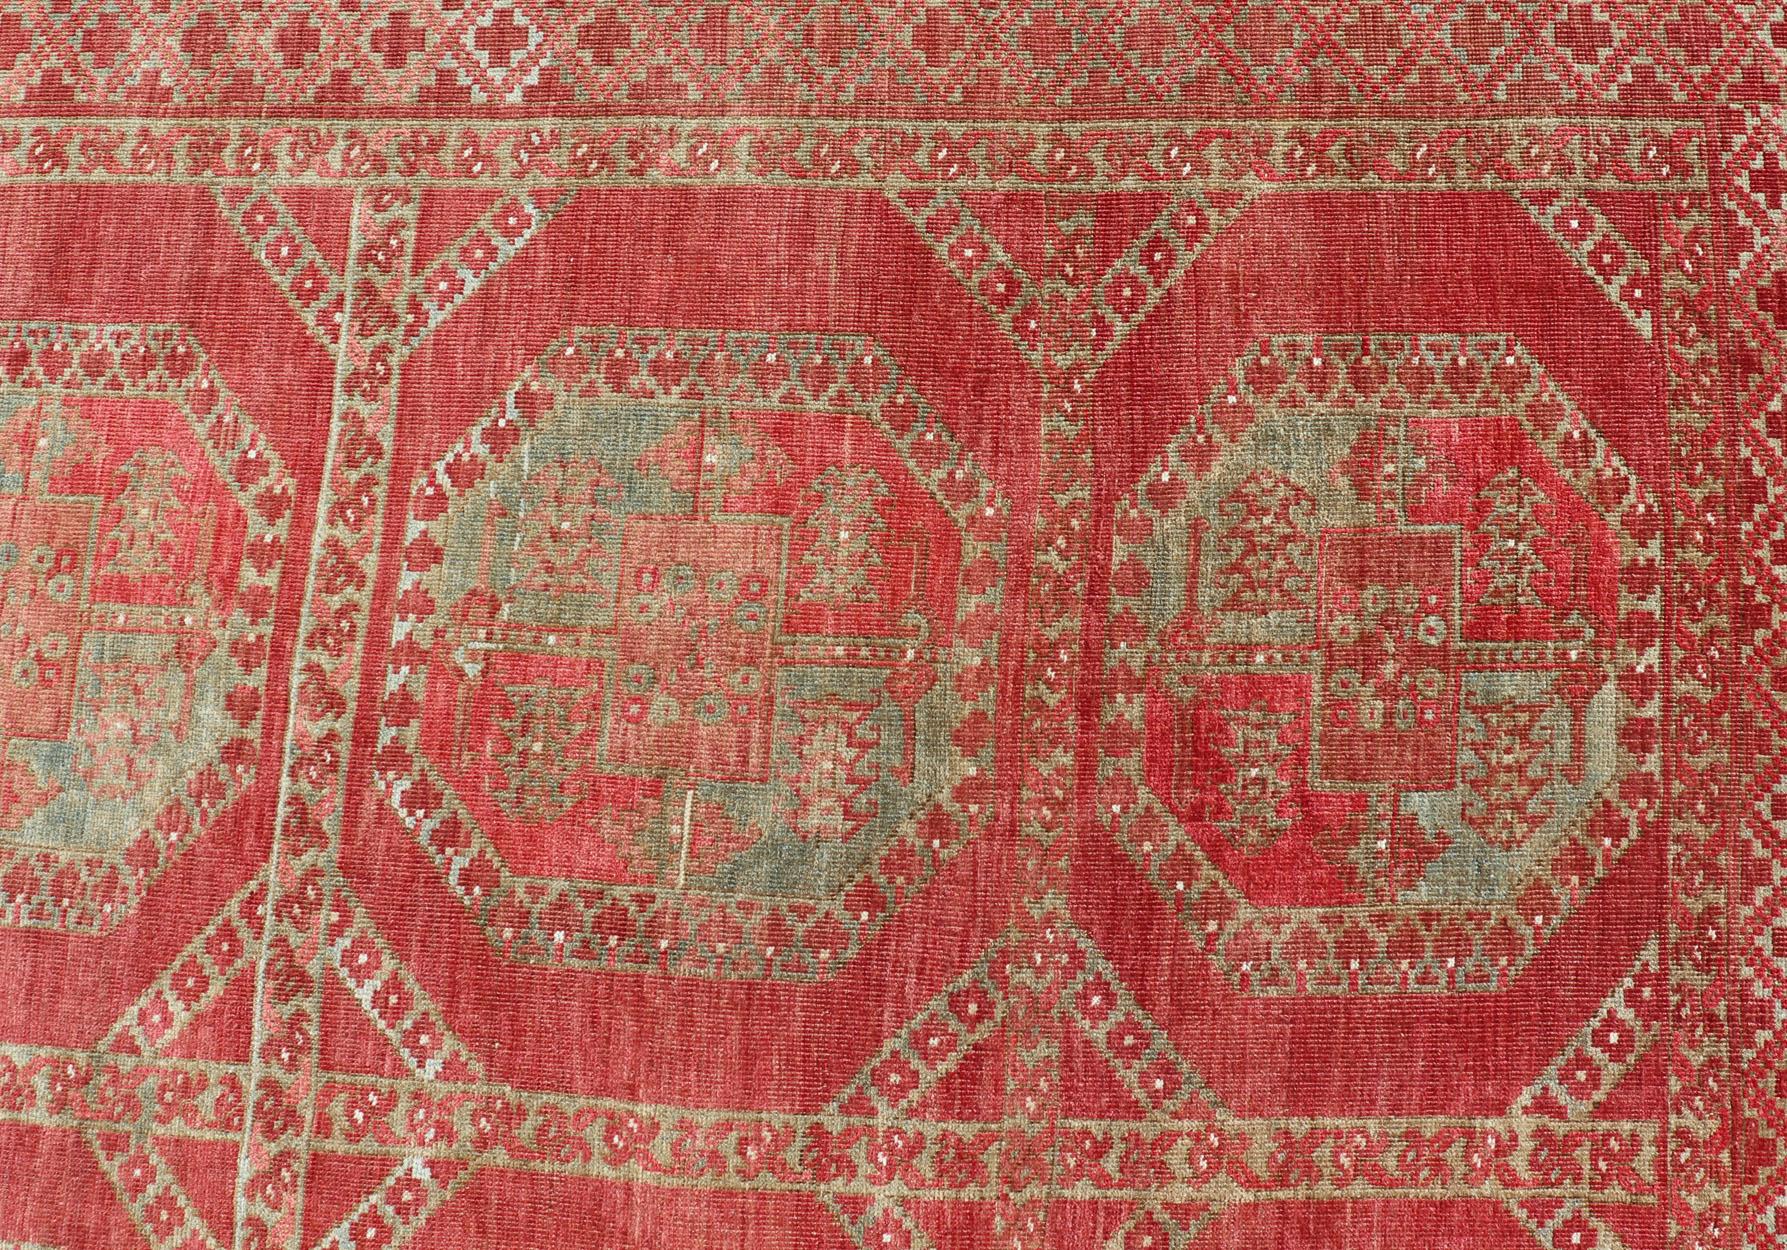 Tribal Hand-Knotted Wool Ersari Rug in Wool with Gul Design in Shades of Red & Green